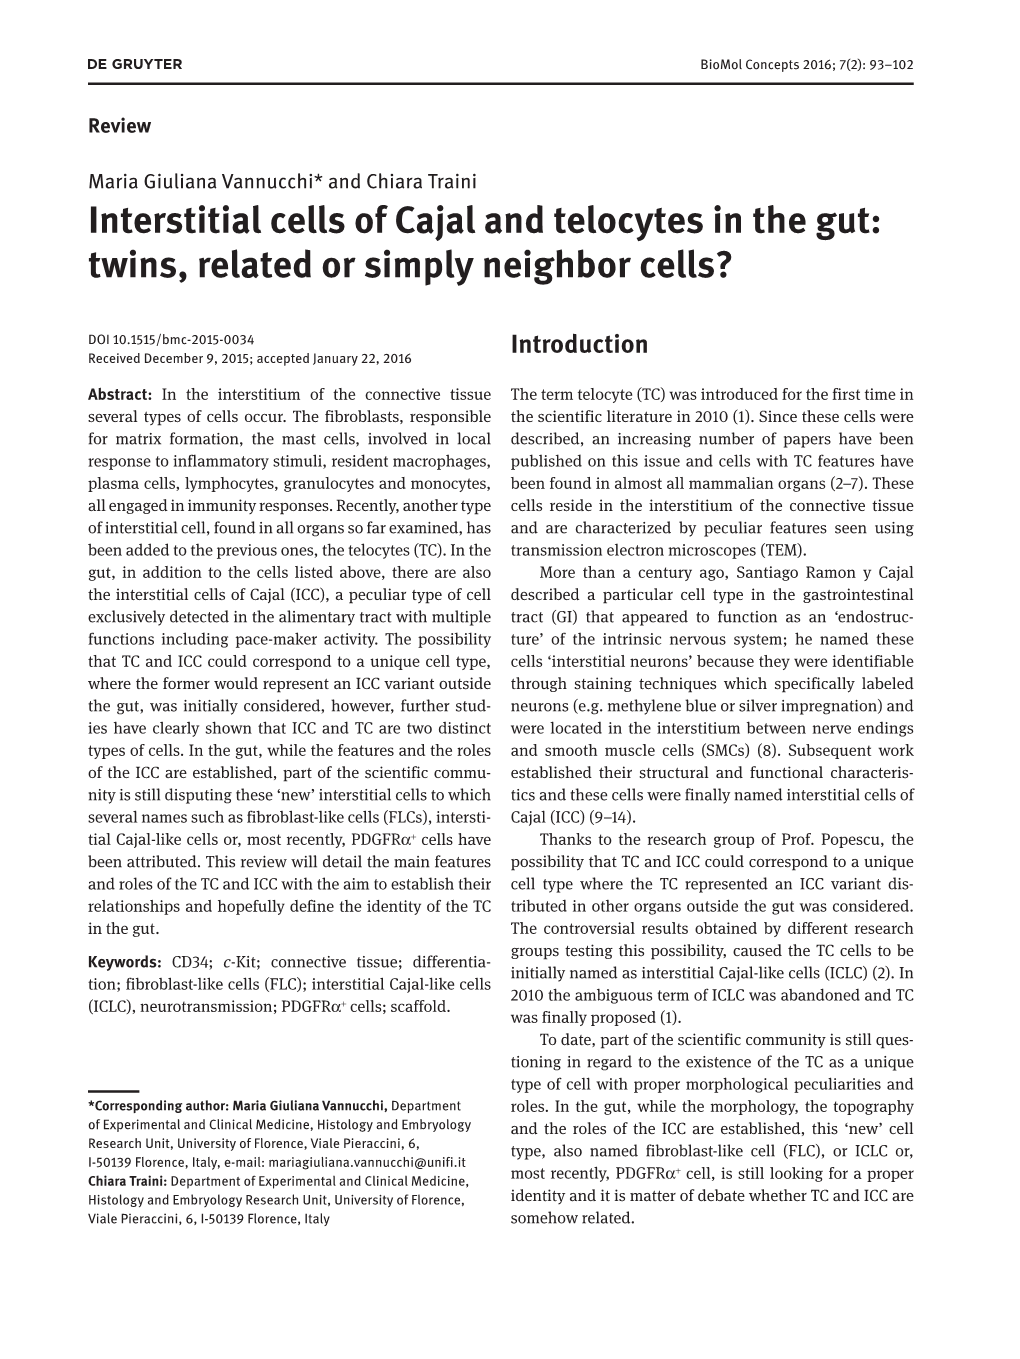 Interstitial Cells of Cajal and Telocytes in the Gut: Twins, Related Or Simply Neighbor Cells?